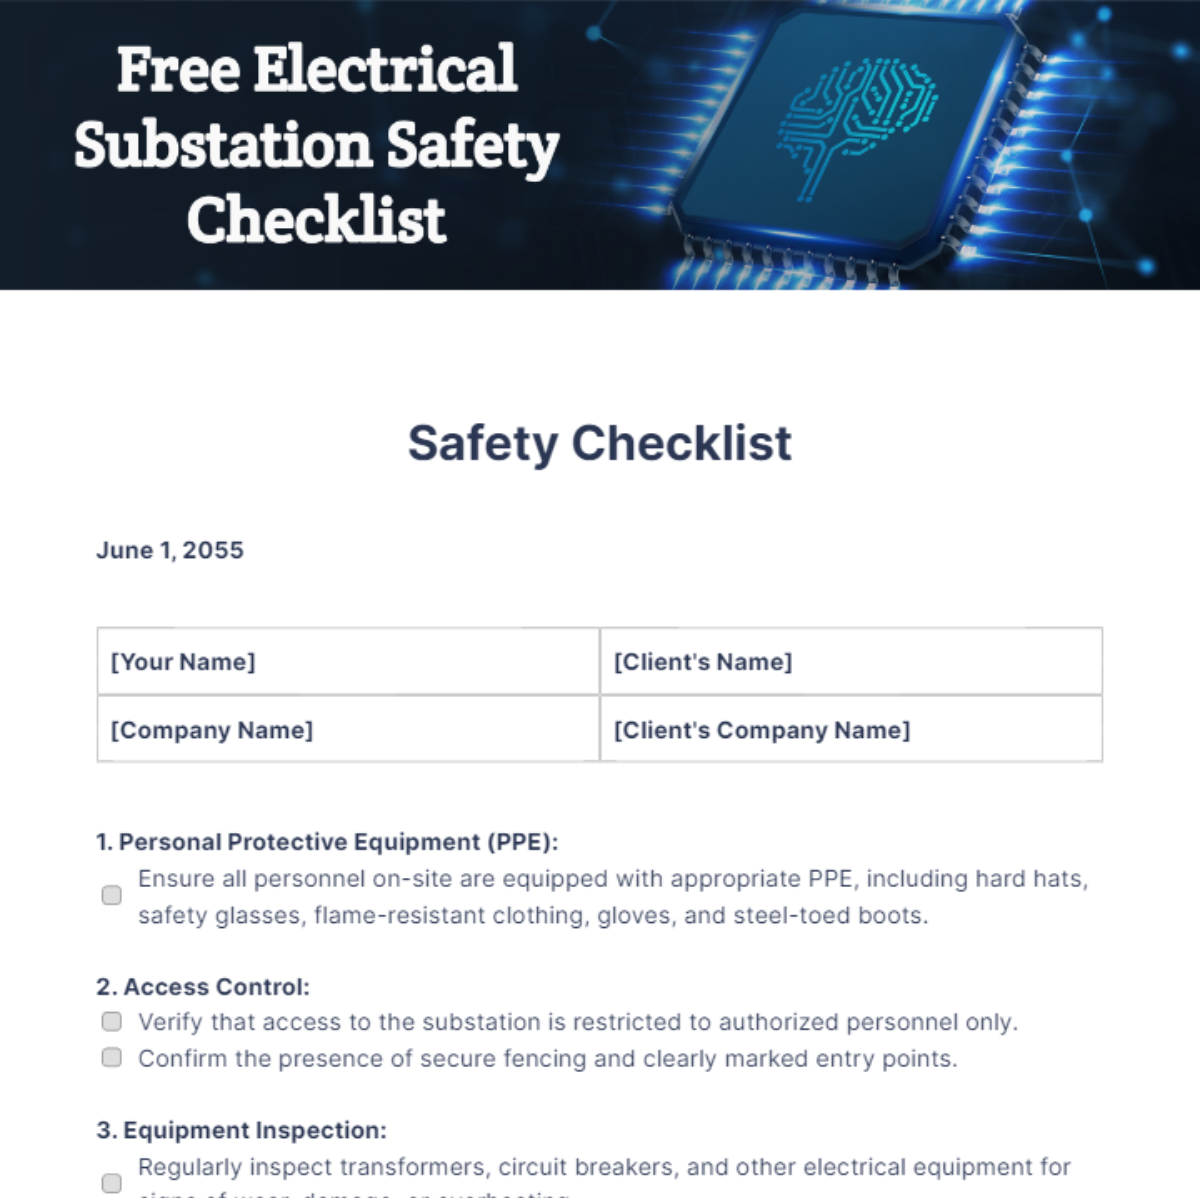 Free Electrical Substation Safety Checklist Template